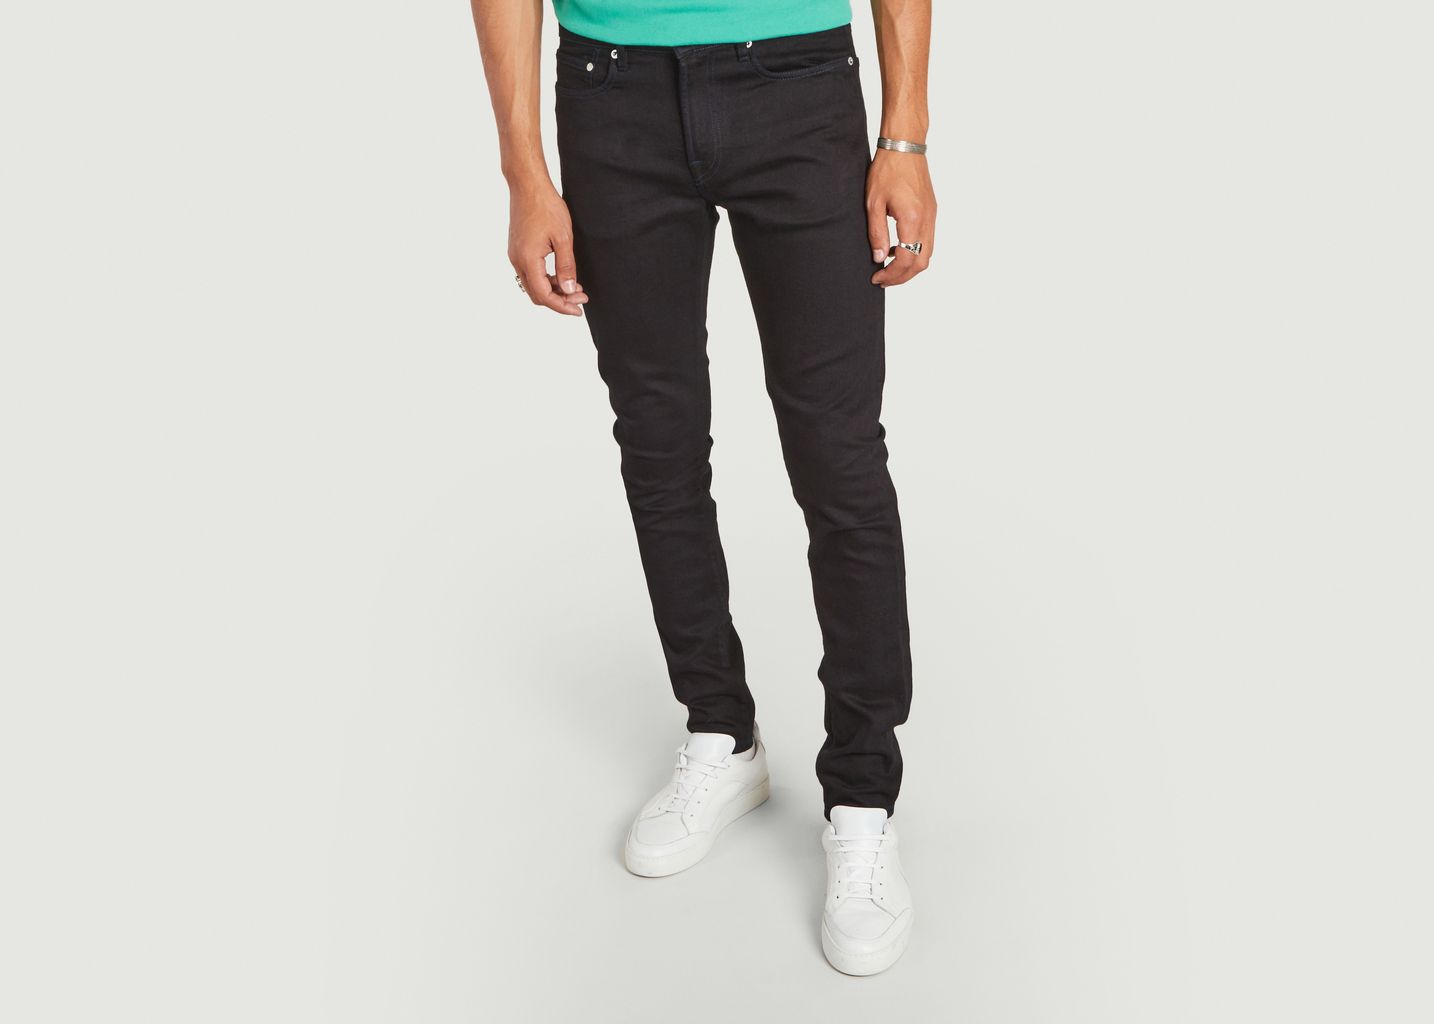 Jeans Slim Fit - PS by PAUL SMITH